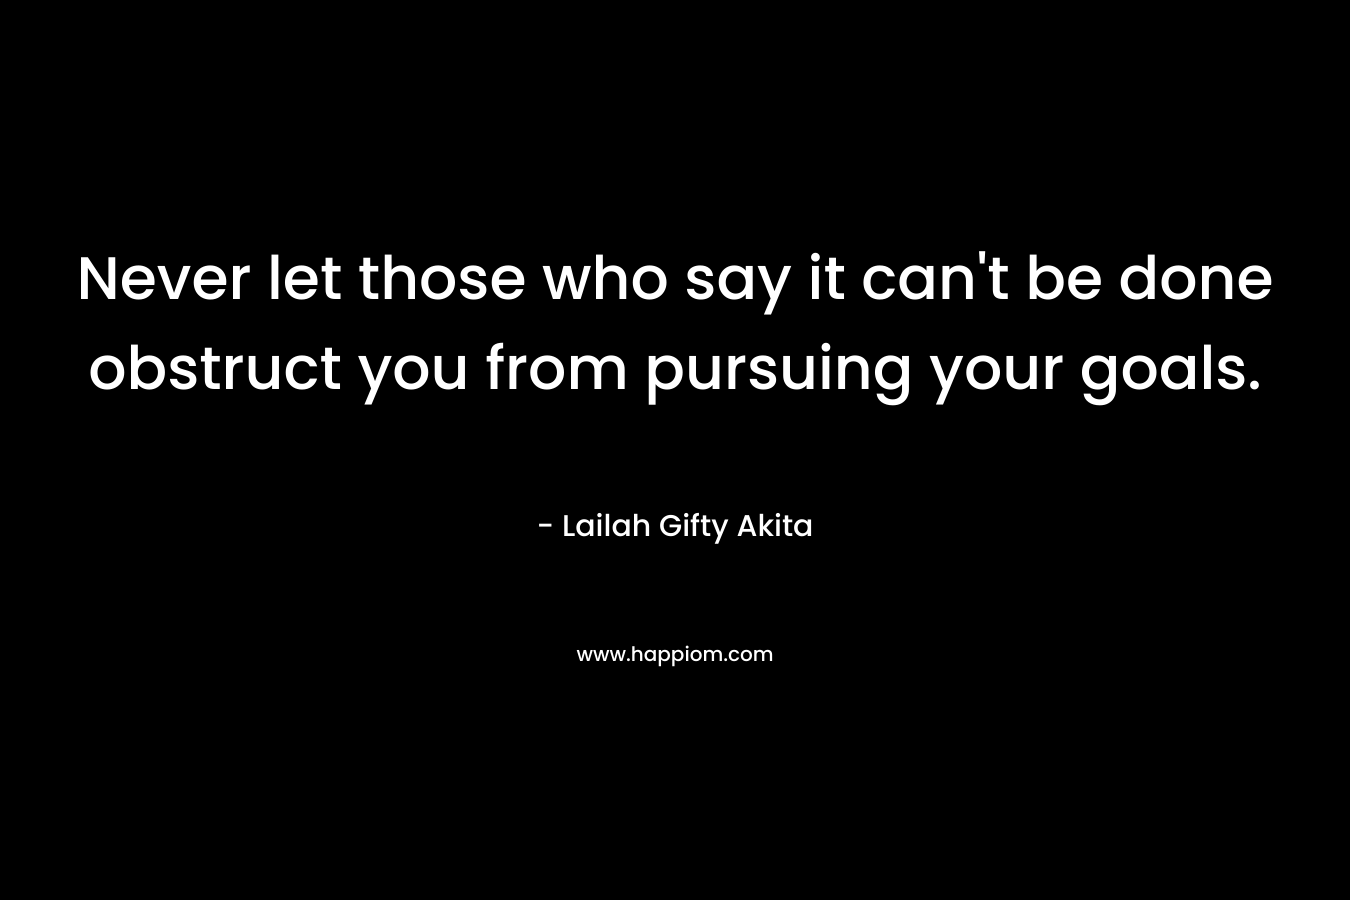 Never let those who say it can’t be done obstruct you from pursuing your goals. – Lailah Gifty Akita